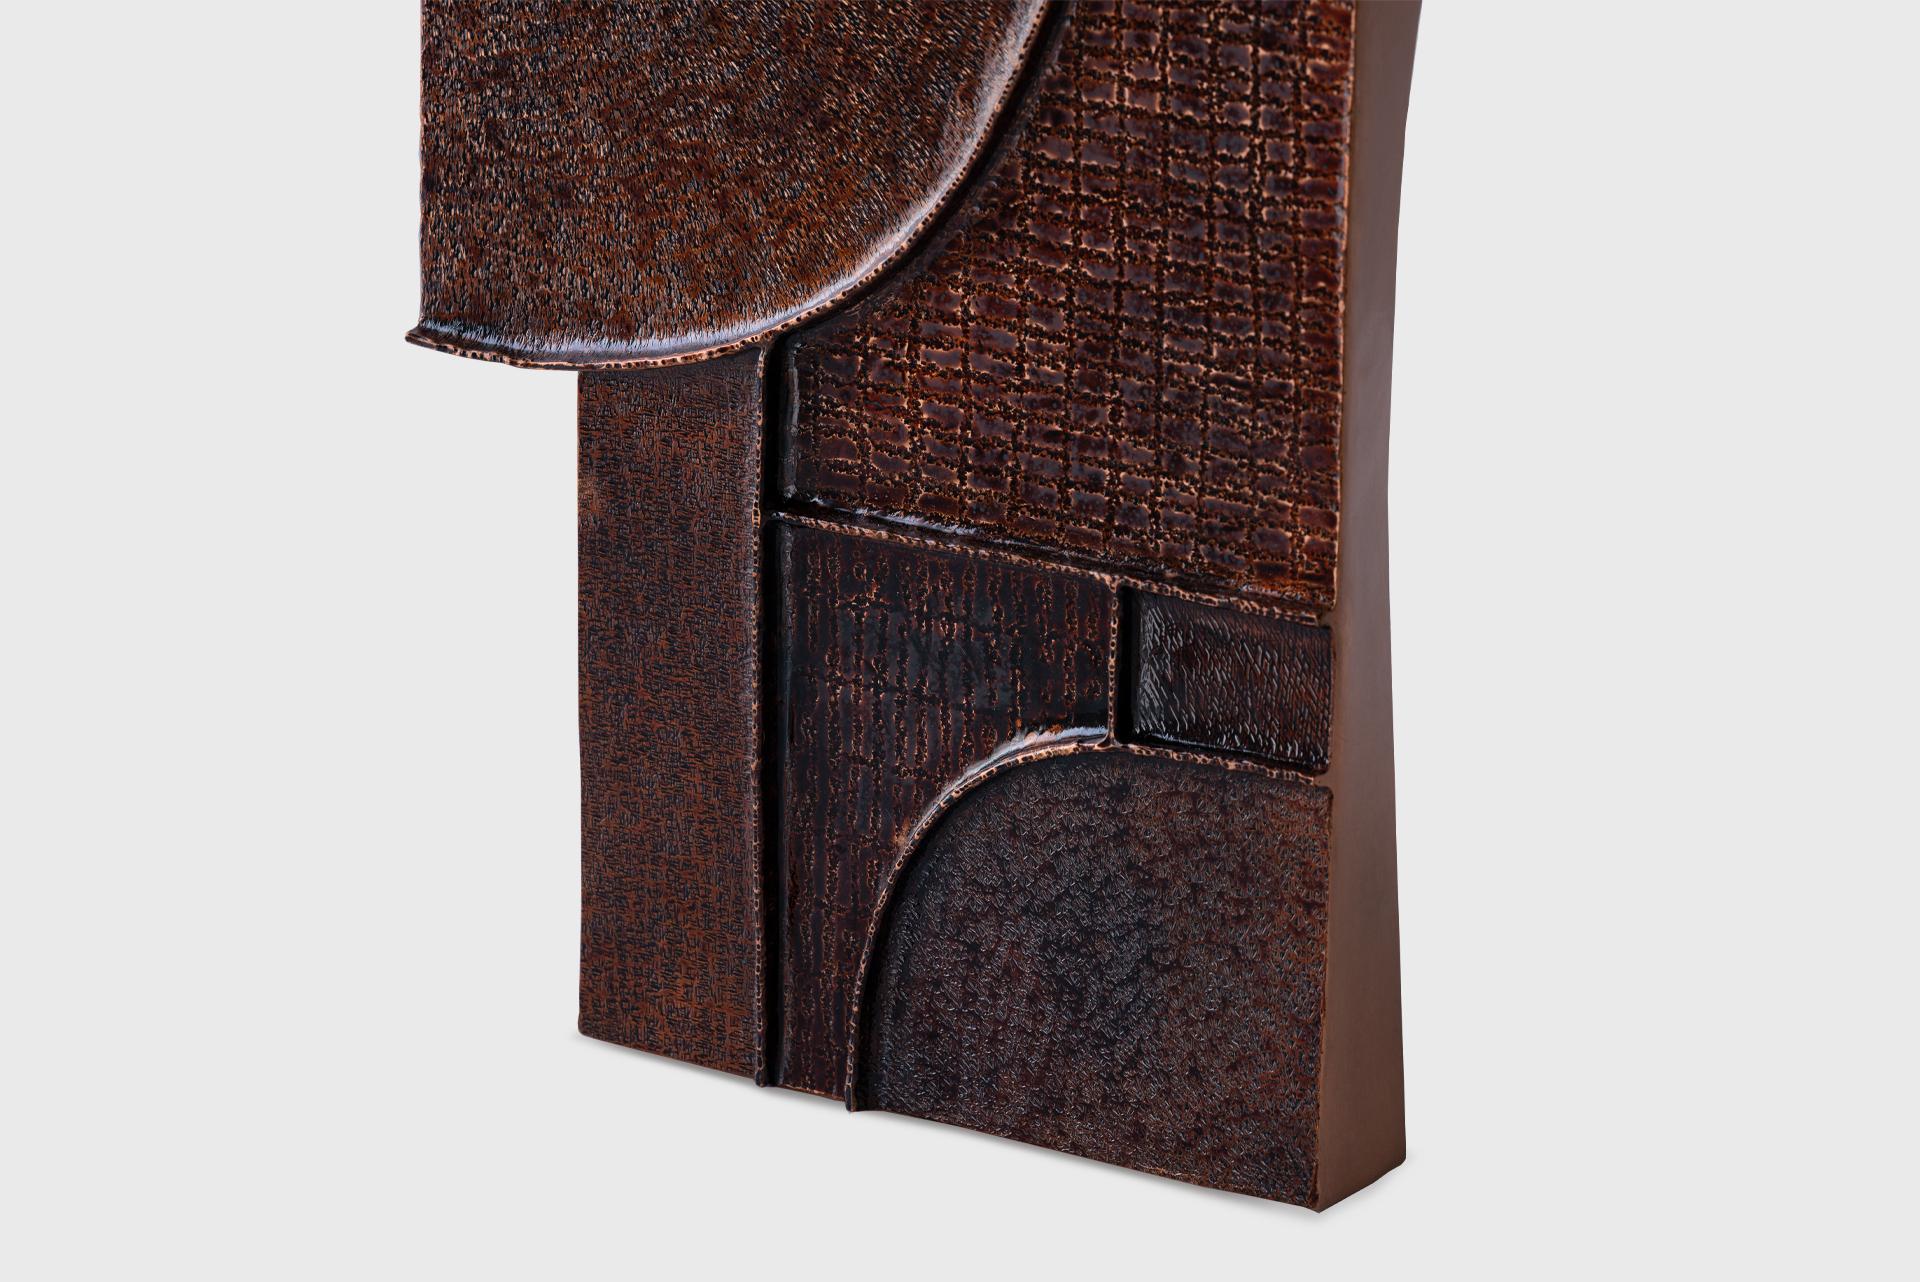 Contemporary Wall Object 2, Textured Natural Dark Lacquer, Seung Hyun Lee, Korea For Sale 2